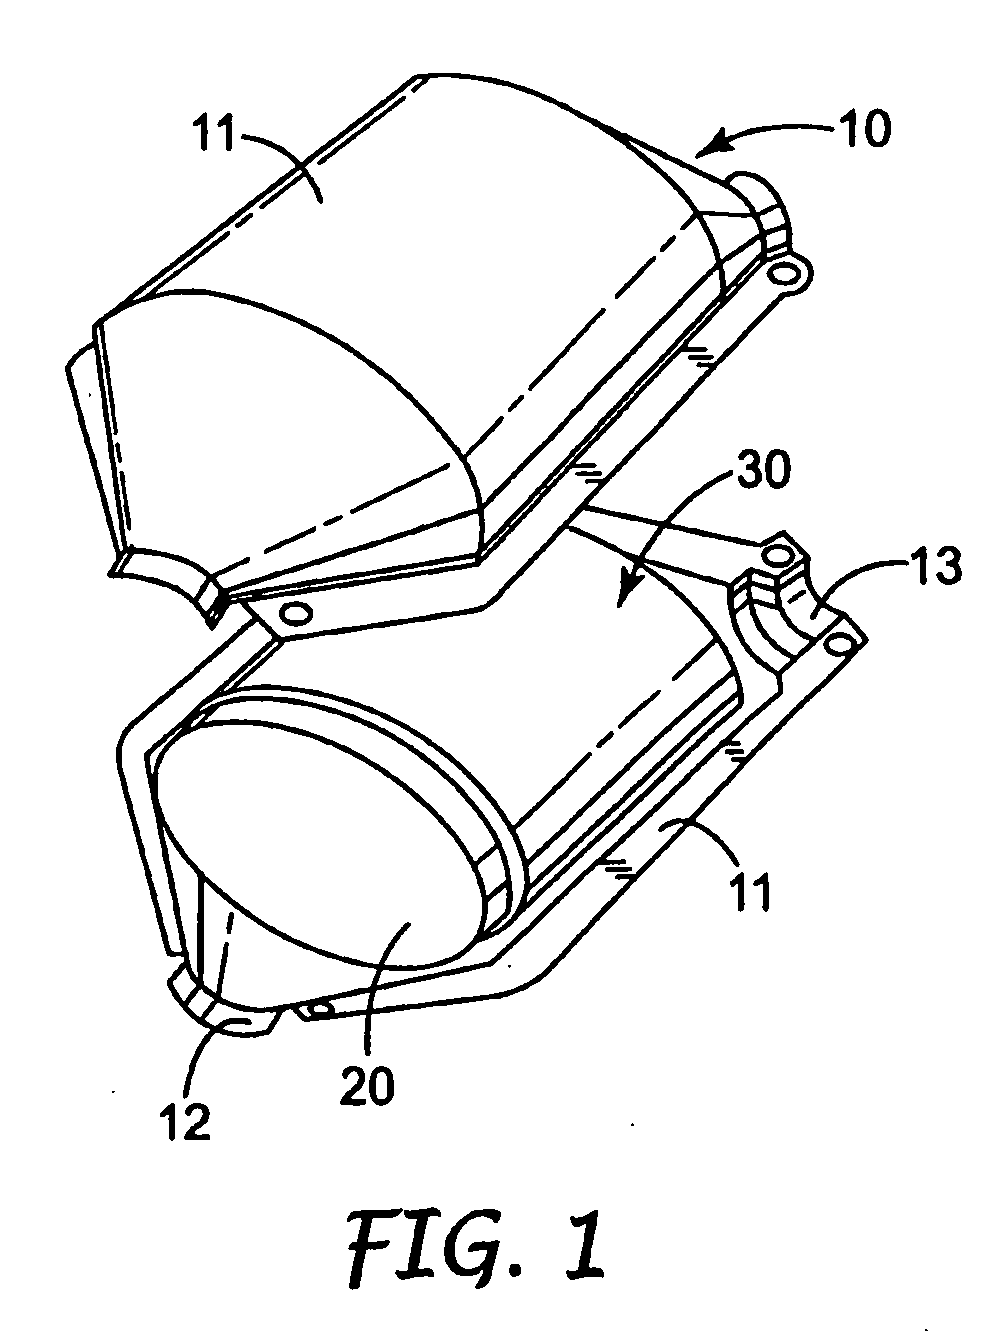 Mat for mounting a pollution control element in a pollution control device for the treatment of exhaust gas